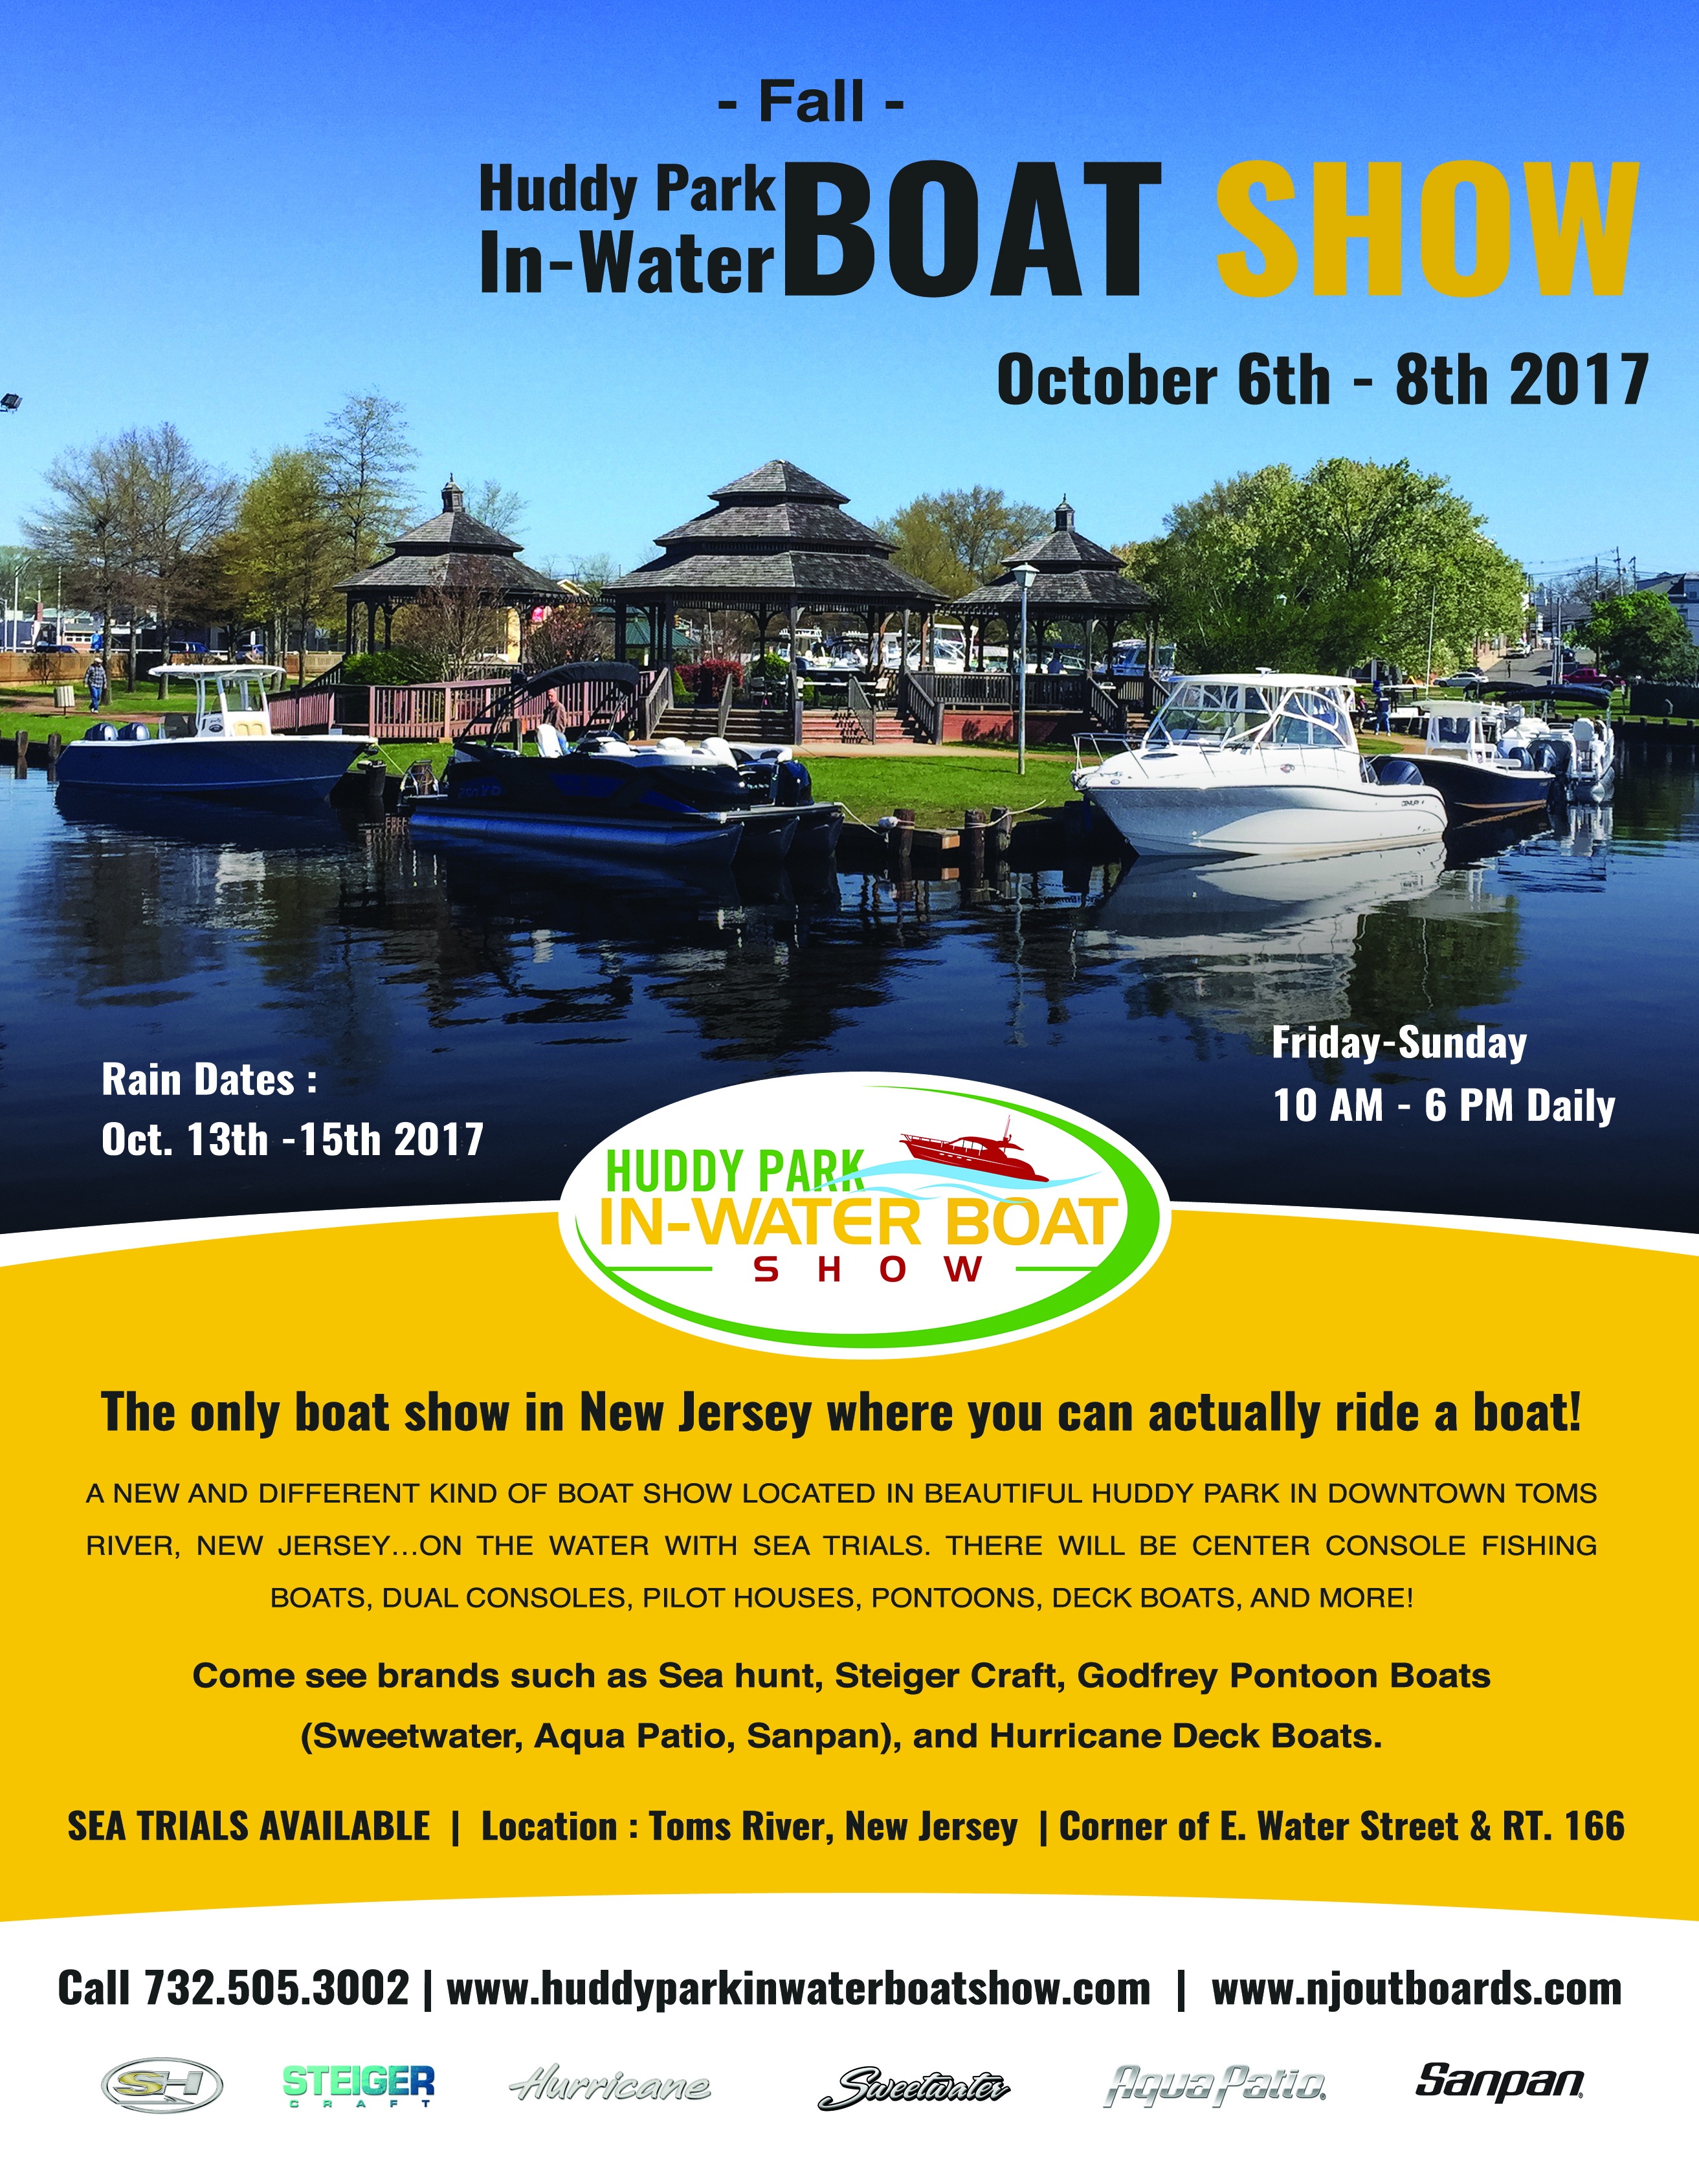 Fall Huddy Park In Water Boat Show Flyer